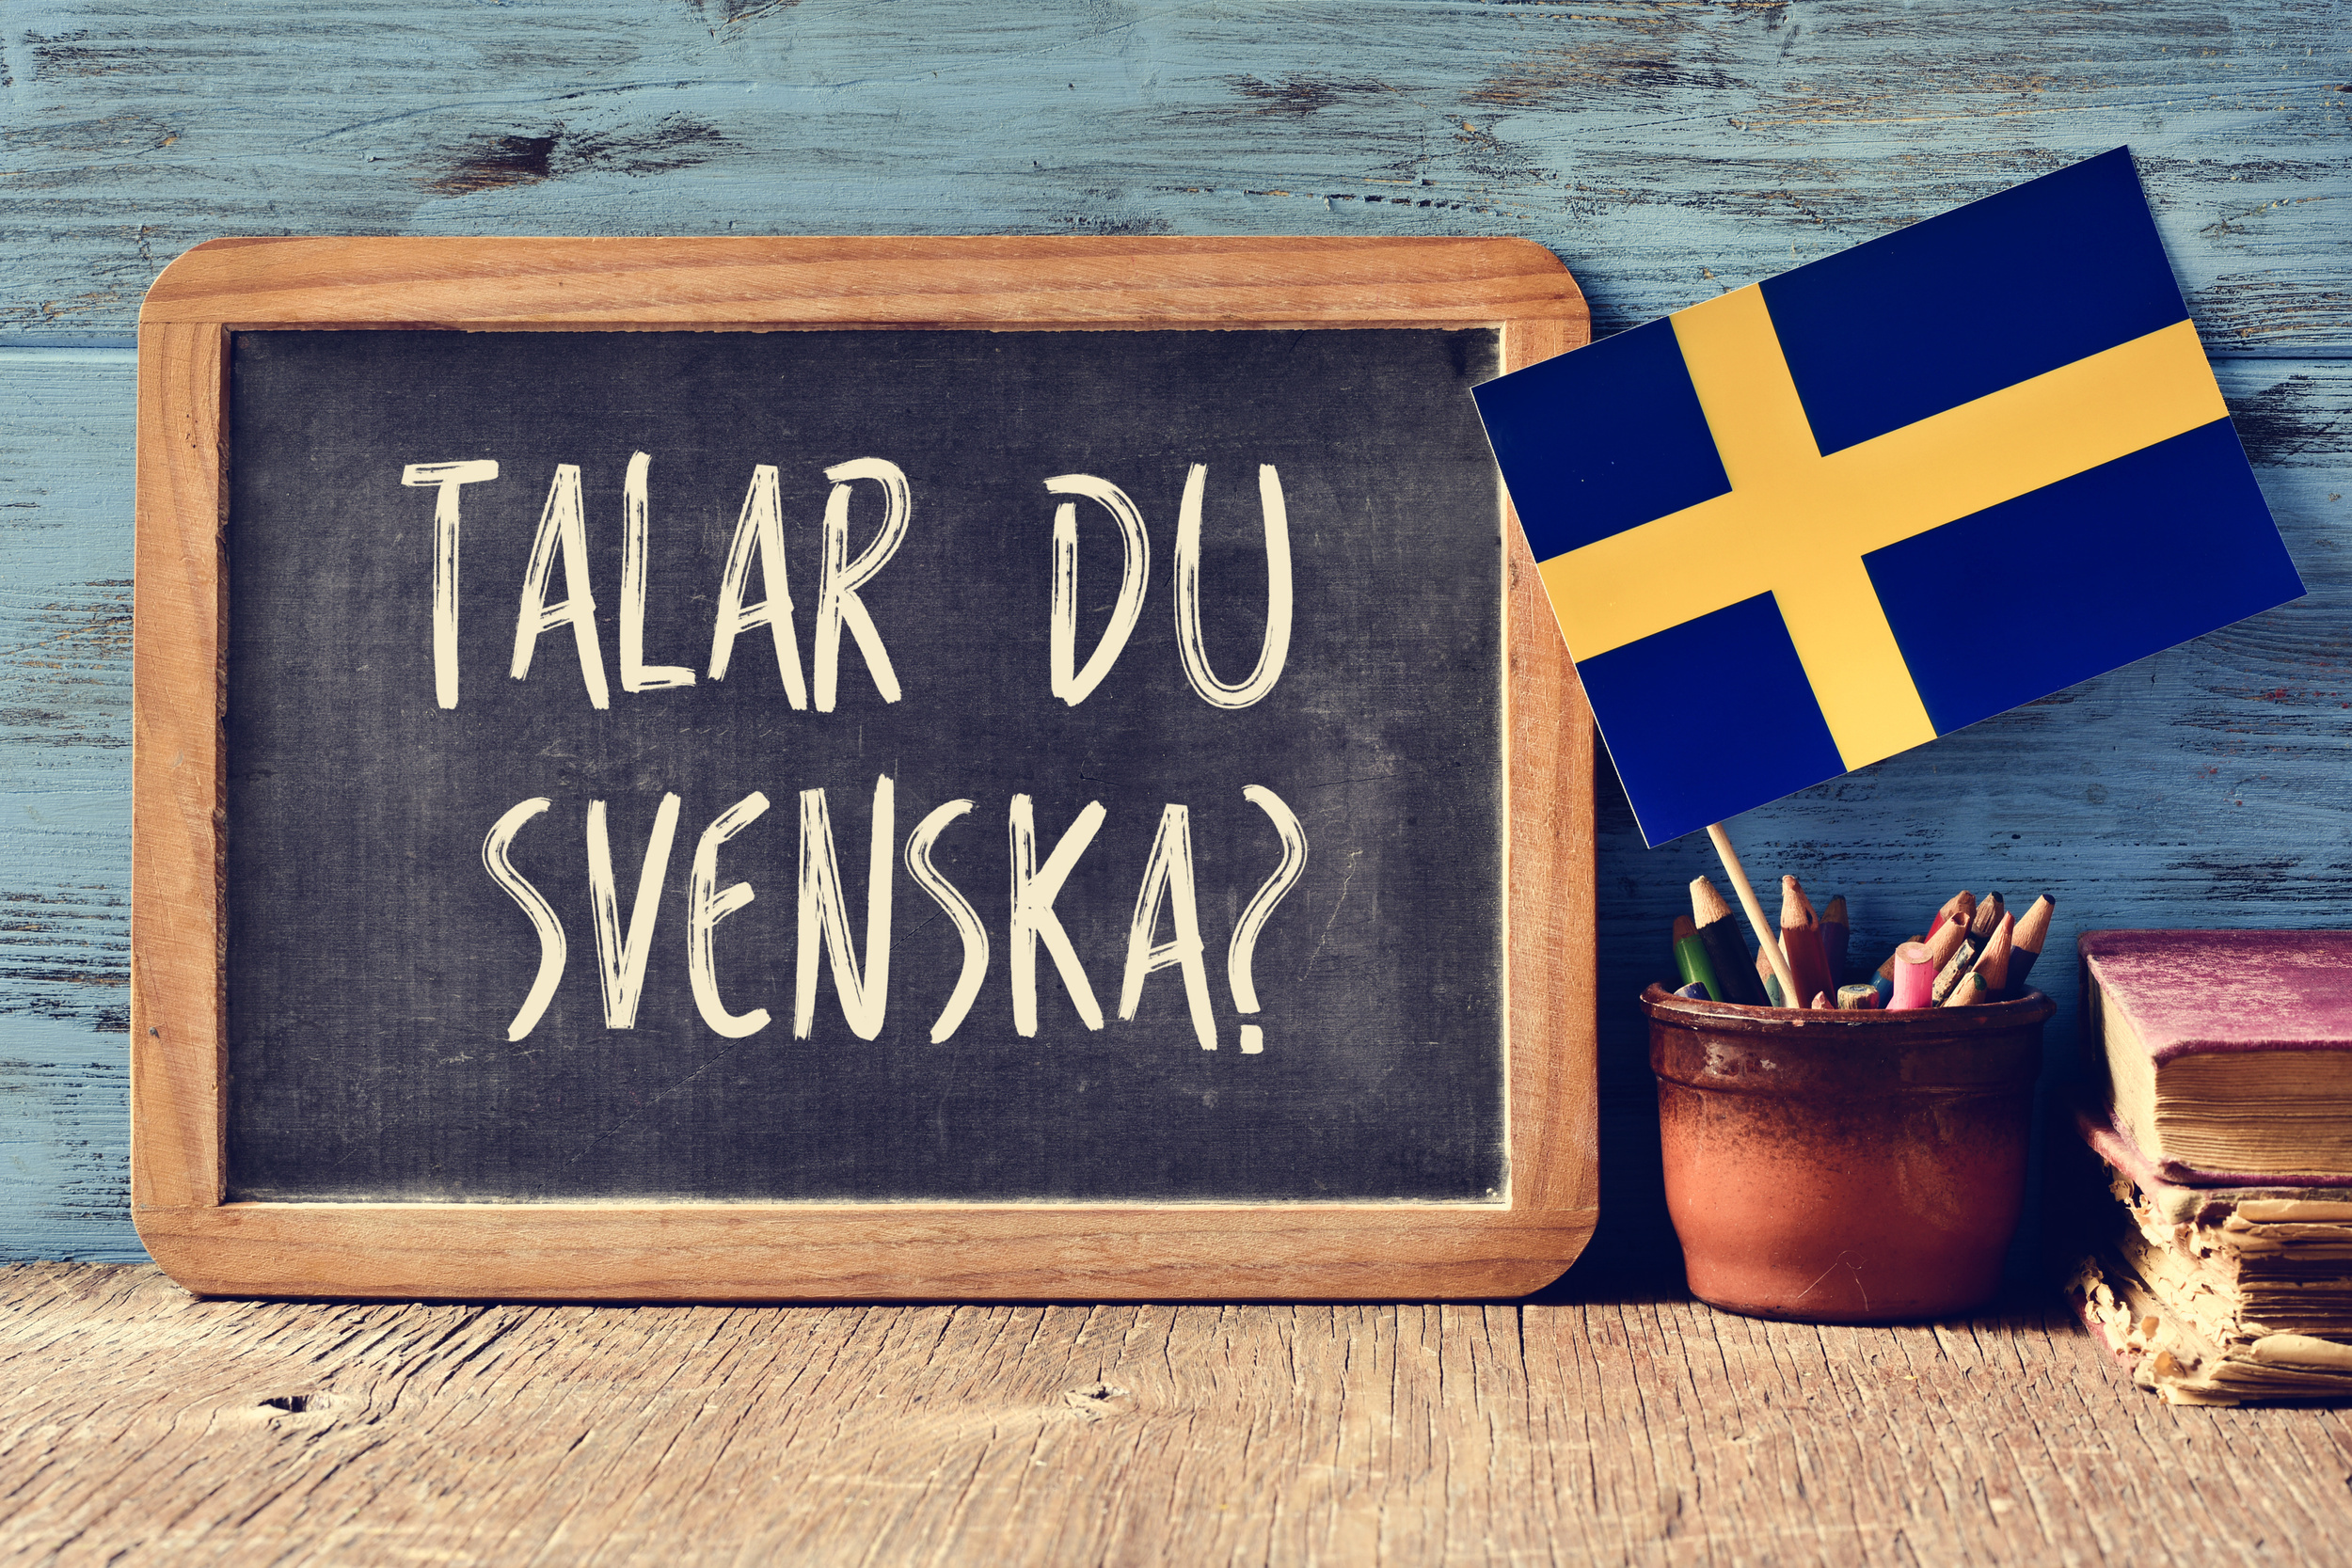 <p>Swedish, like English, is a Germanic language, so the two have many similarities. The pronunciations are quite different from language to language, but once you’ve got that part of Swedish down, the rest should come rather naturally. </p><p>You may also like: <a href='https://www.yardbarker.com/lifestyle/articles/12_west_coast_small_towns_you_should_visit/s1__38393818'>12 West Coast small towns you should visit</a></p>